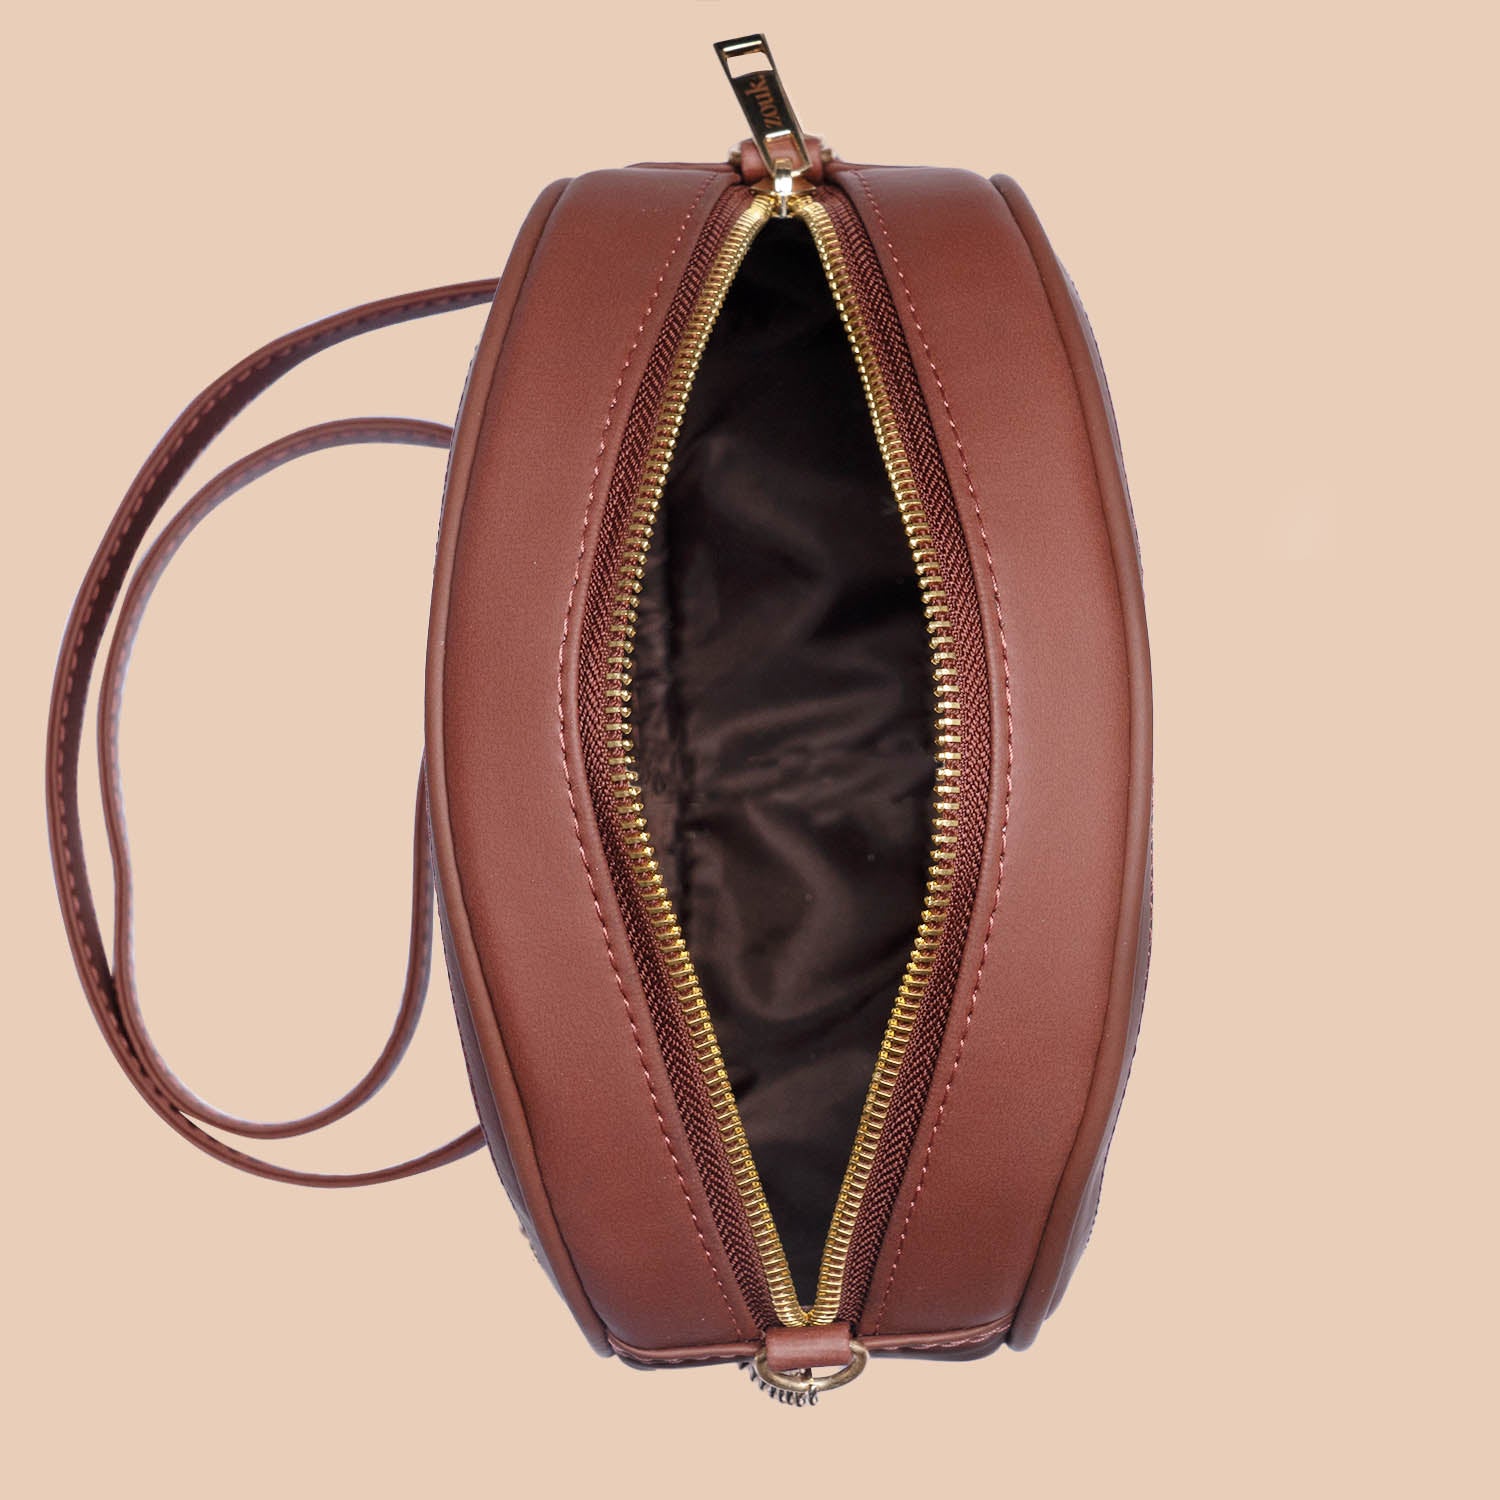 Hooghly Nouveau Round Sling Bag